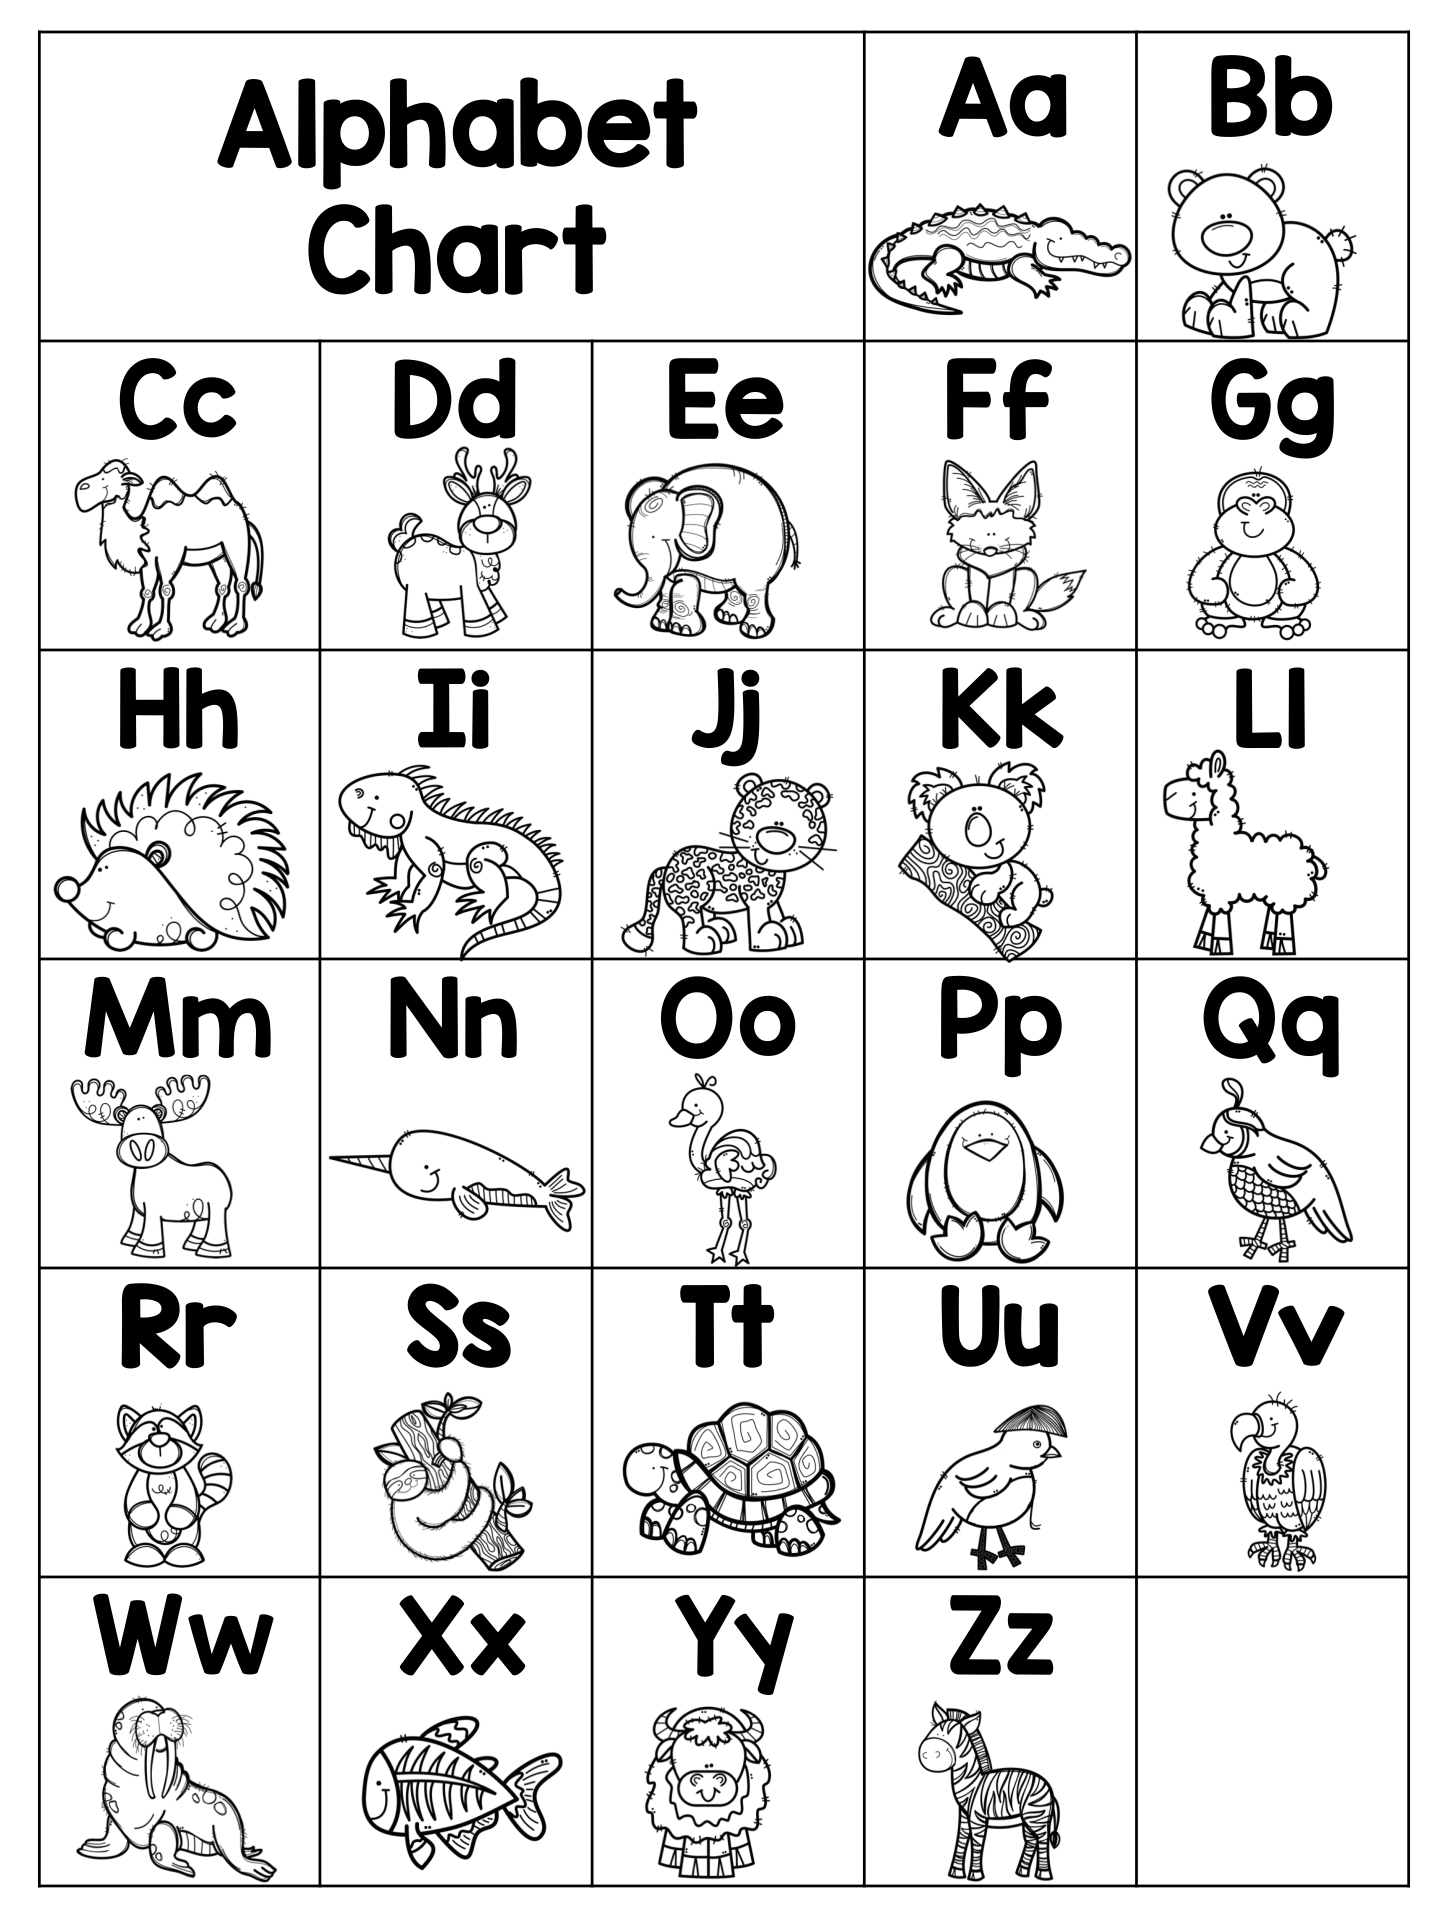 Show How To Print The Alphabet Printables On One Page